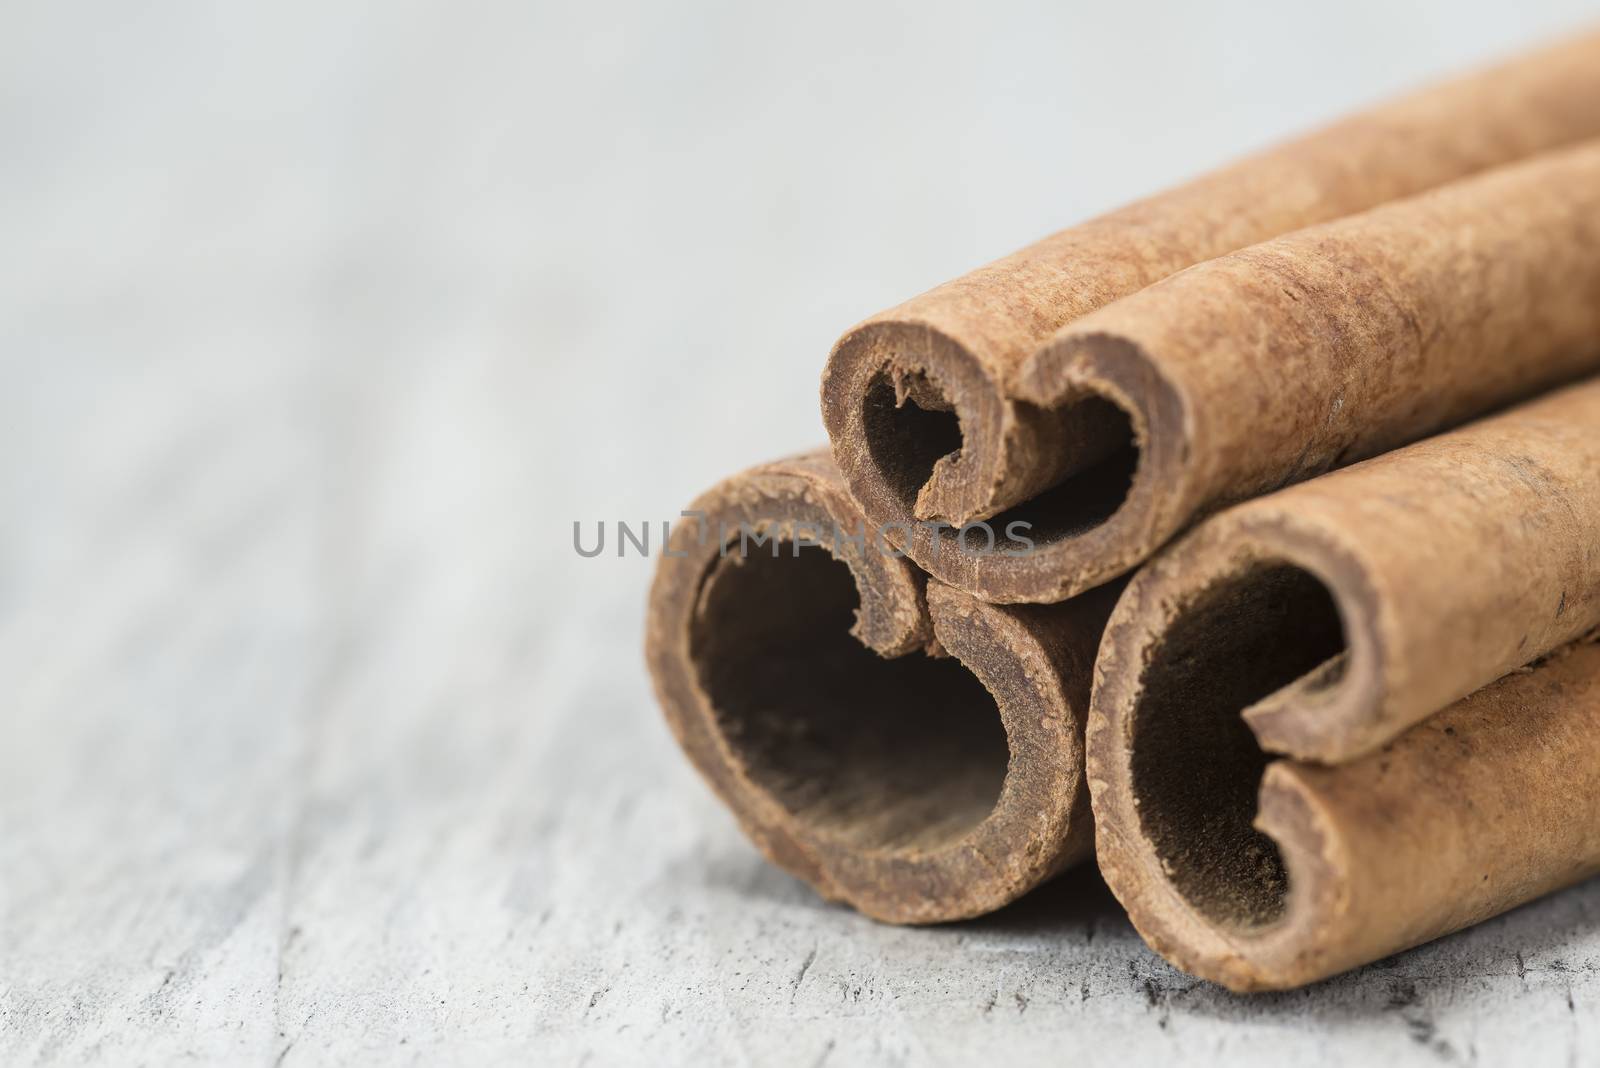 Cinnamon sticks on a wooden background by angelsimon